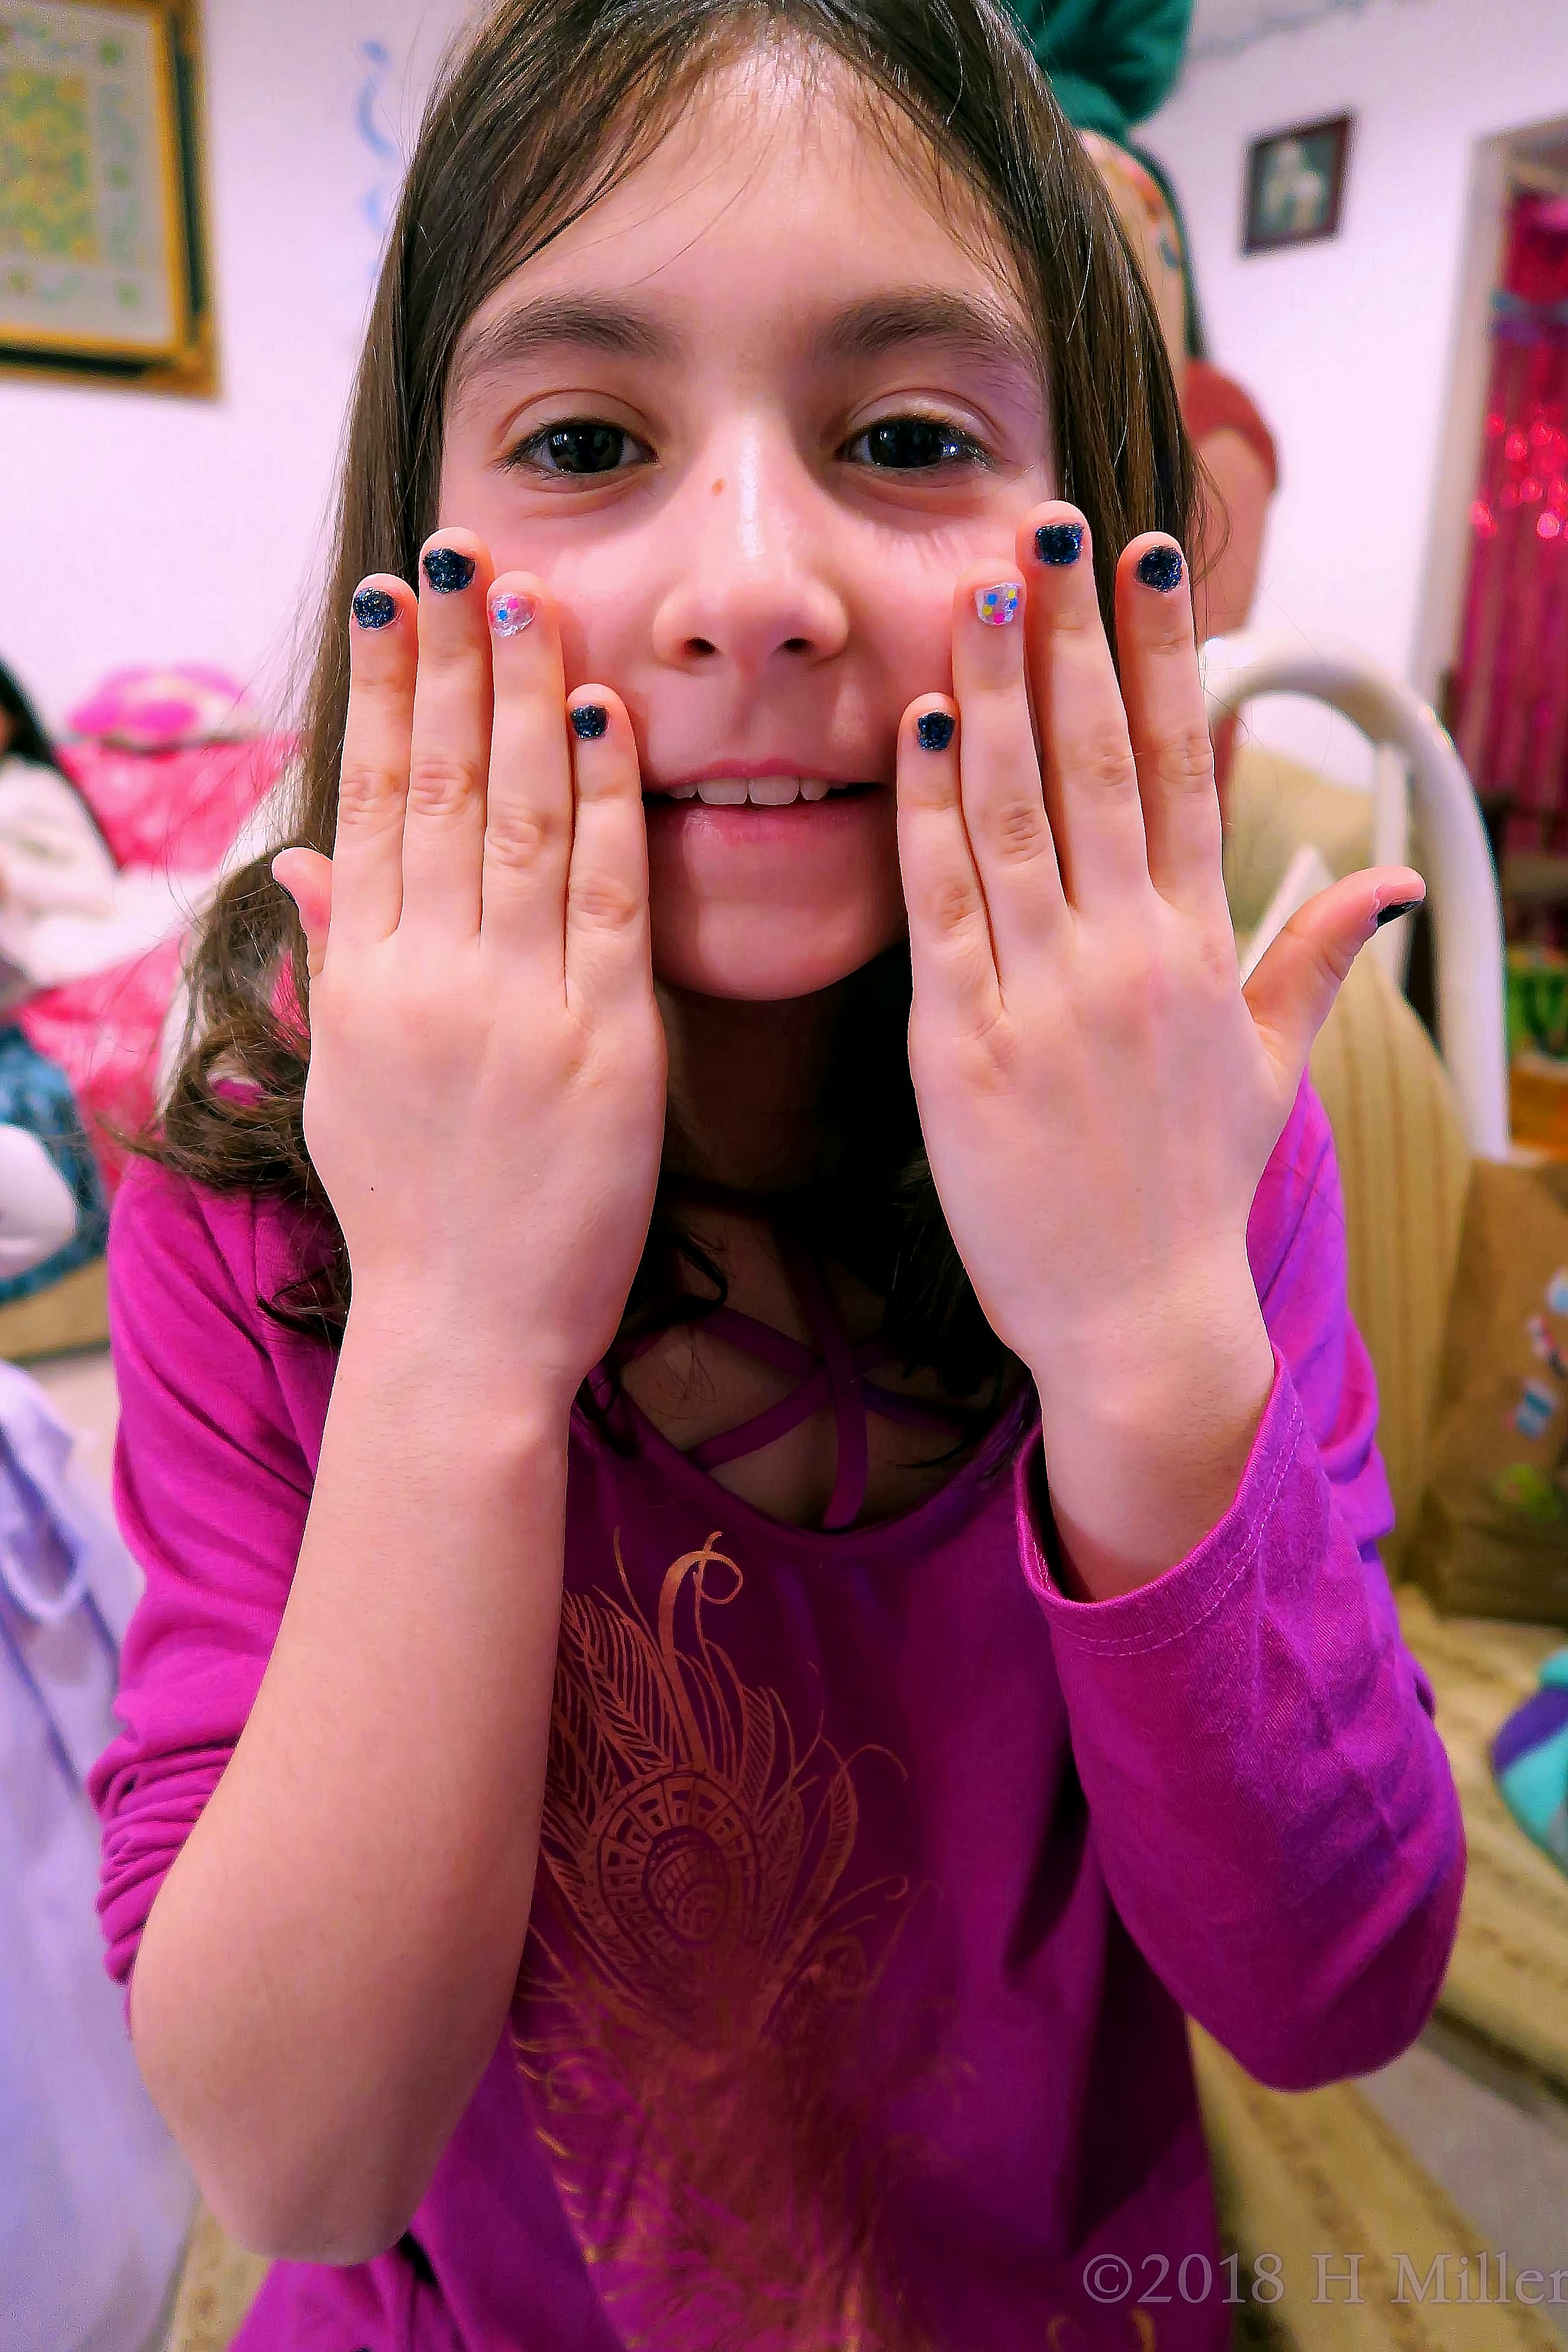 Another Stunning Kids Manicure! Blue With Glittery Dots With A White Accent Nail With Rainbow Glitter On Her Mini Mani 